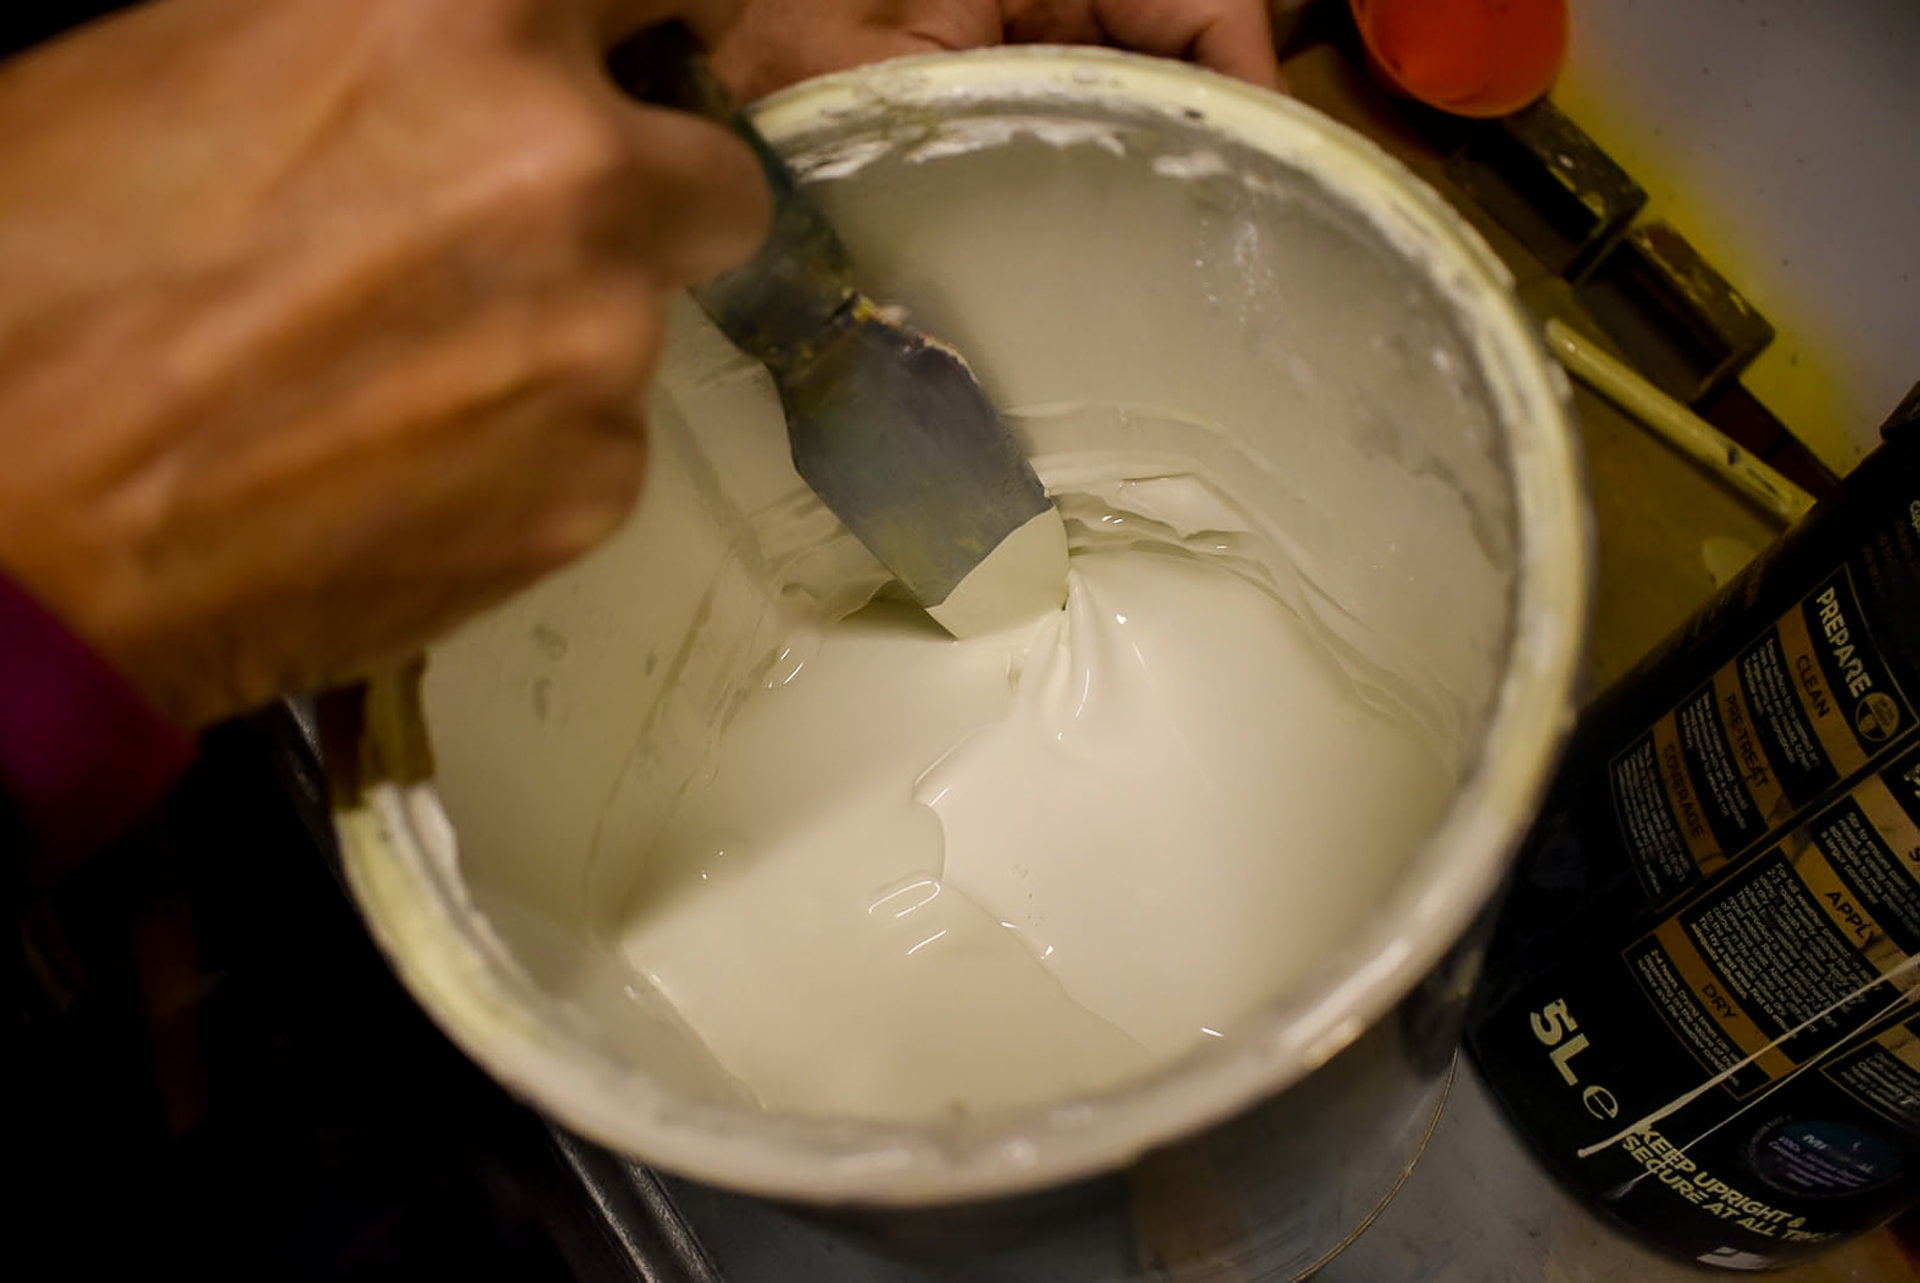 Removing paint skin from paint before straining